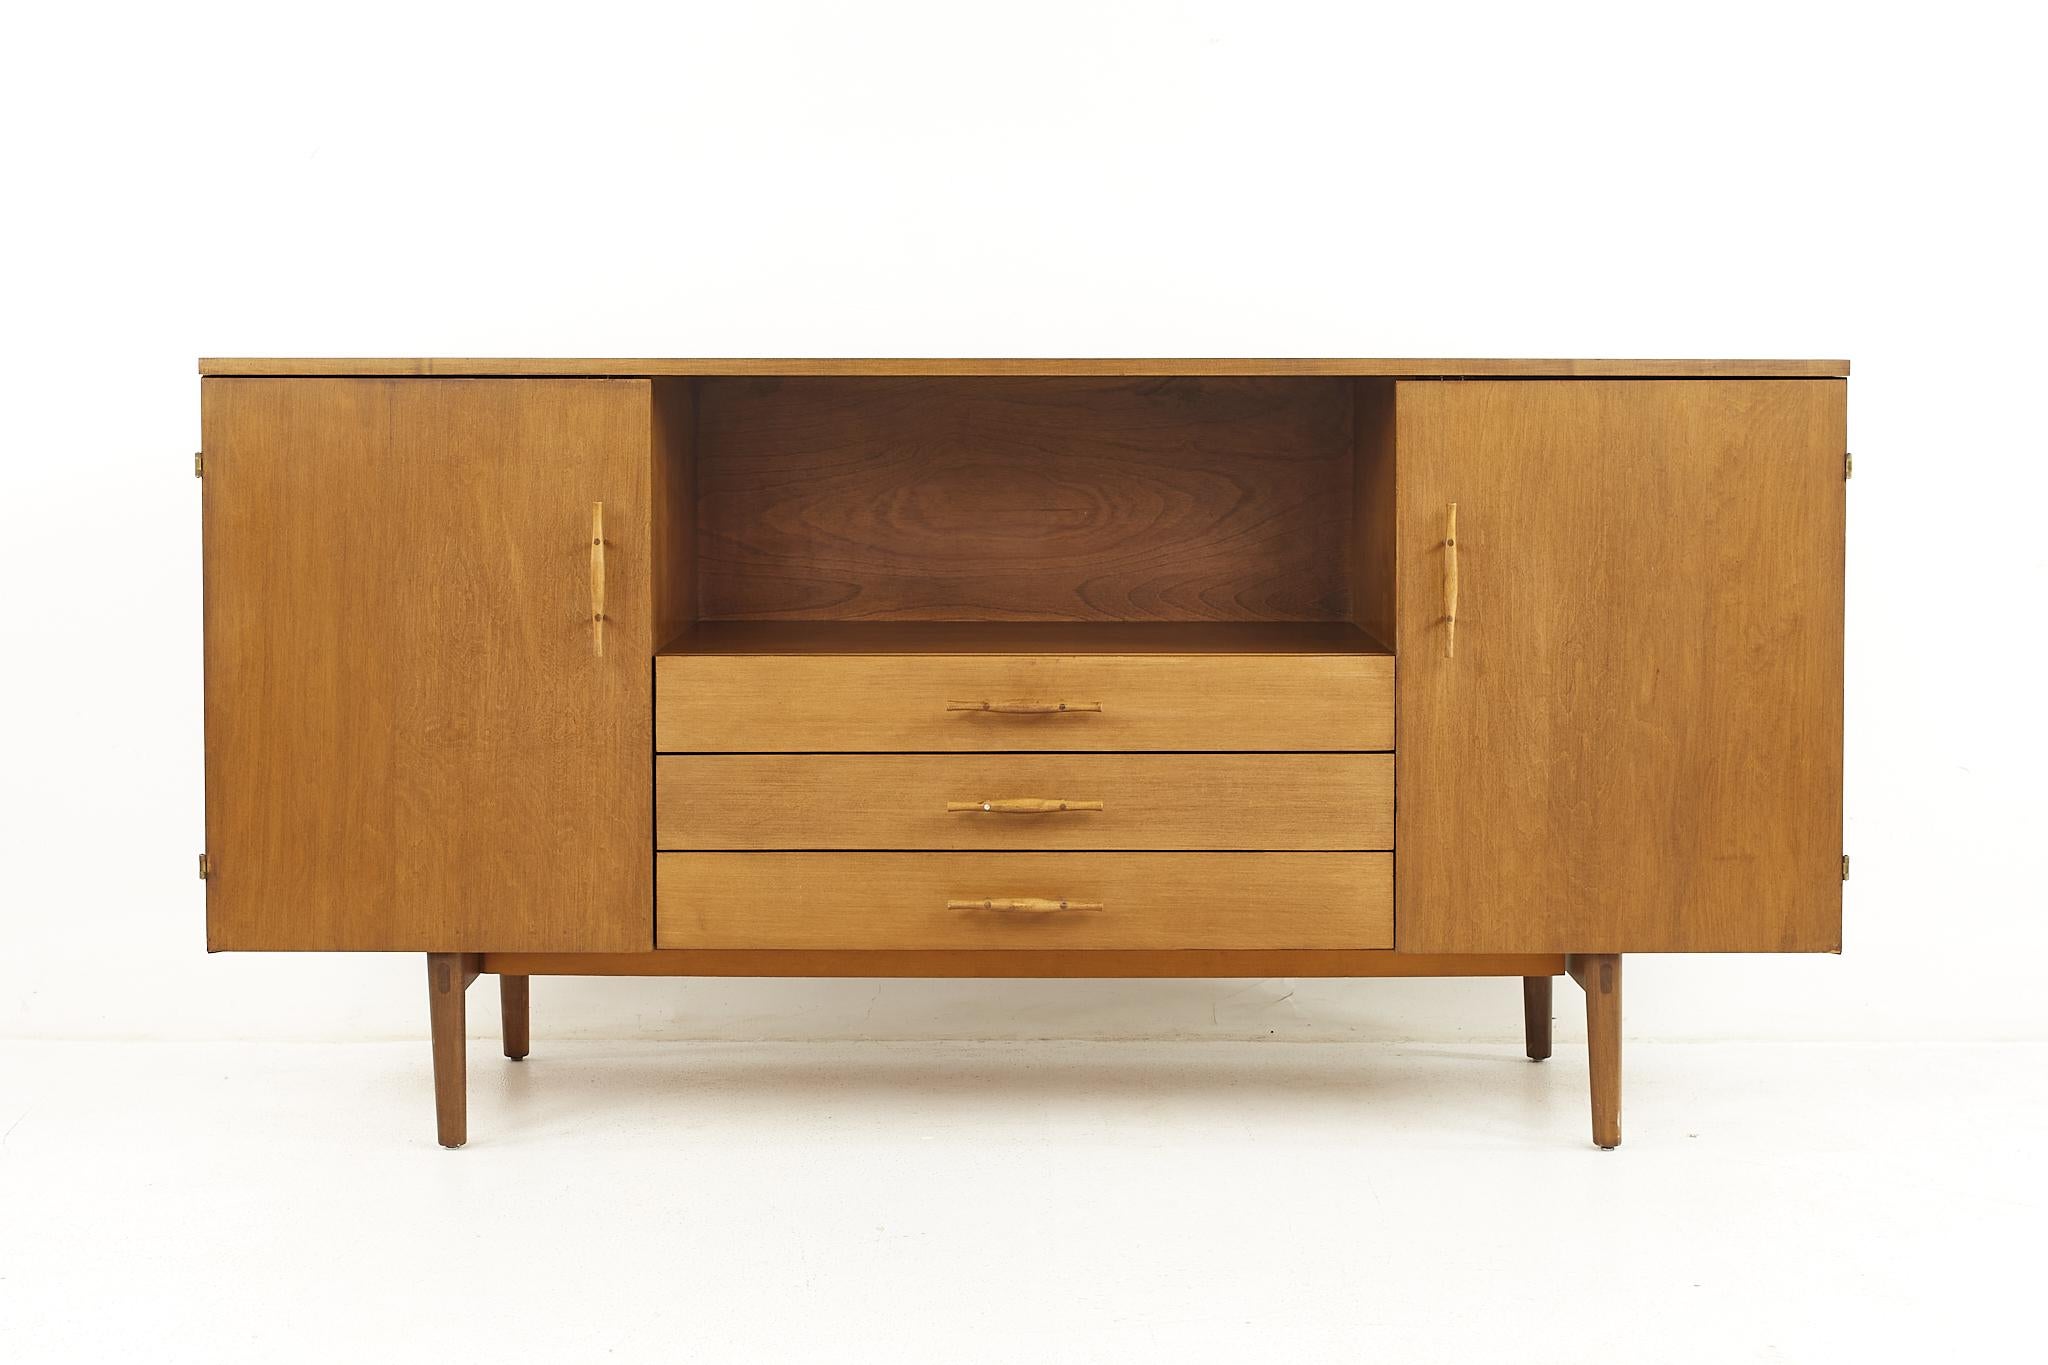 Paul McCobb Planner Group Mid Century Credenza

This credenza measures: 48 wide x 12 deep x 24 inches high

All pieces of furniture can be had in what we call restored vintage condition. That means the piece is restored upon purchase so it’s free of